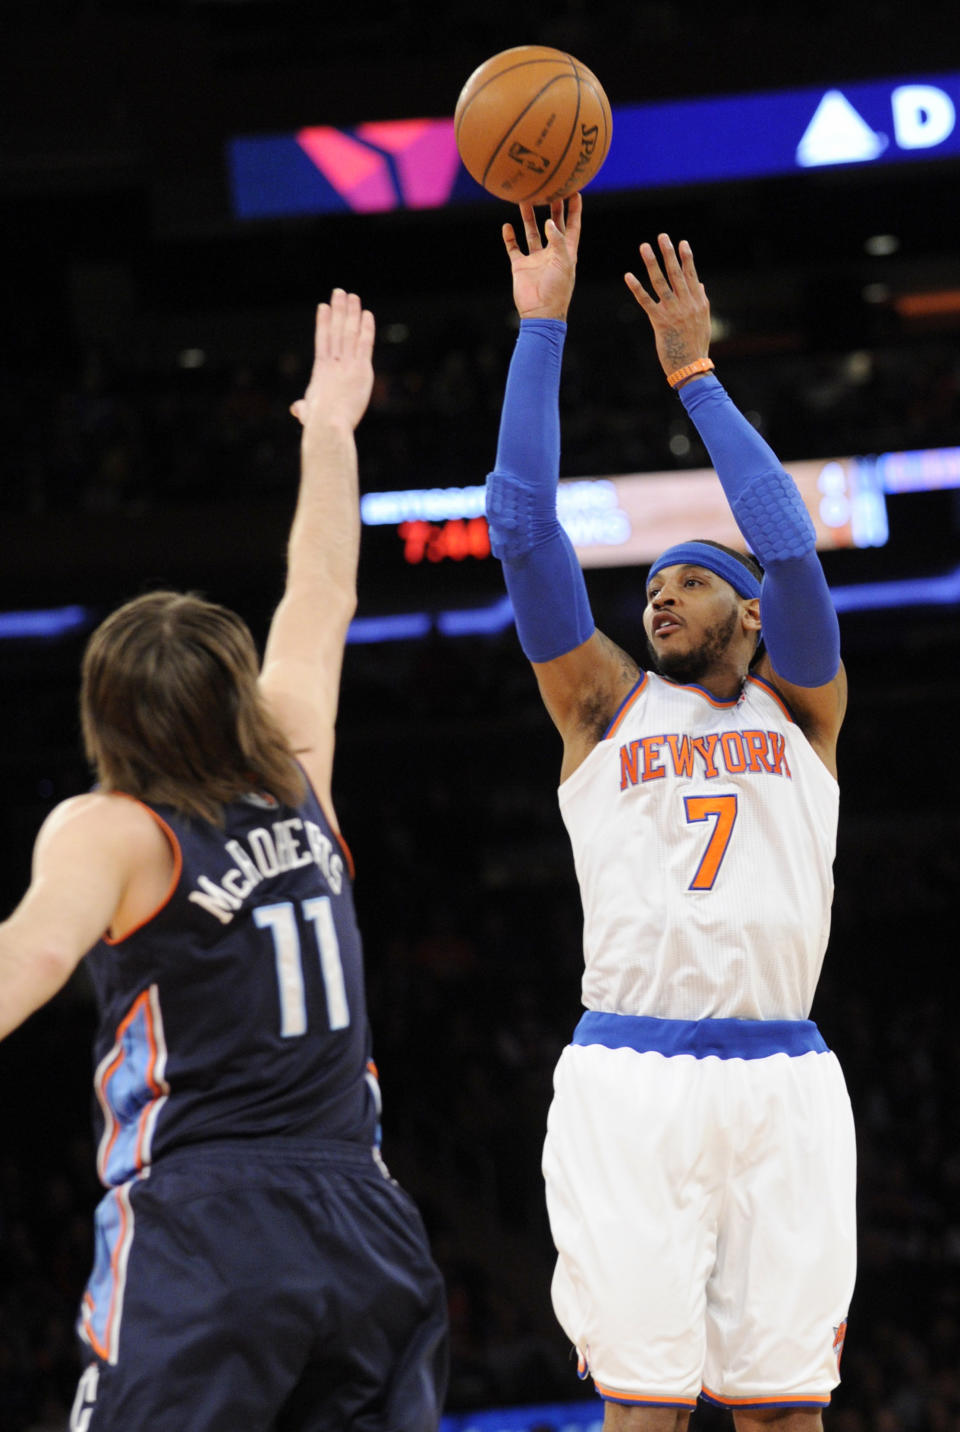 New York Knicks' Carmelo Anthony, right, shoots over Charlotte Bobcats' Josh McRoberts during the first quarter of an NBA basketball game, Friday, Jan. 24, 2014, at Madison Square Garden in New York. (AP Photo/Bill Kostroun)